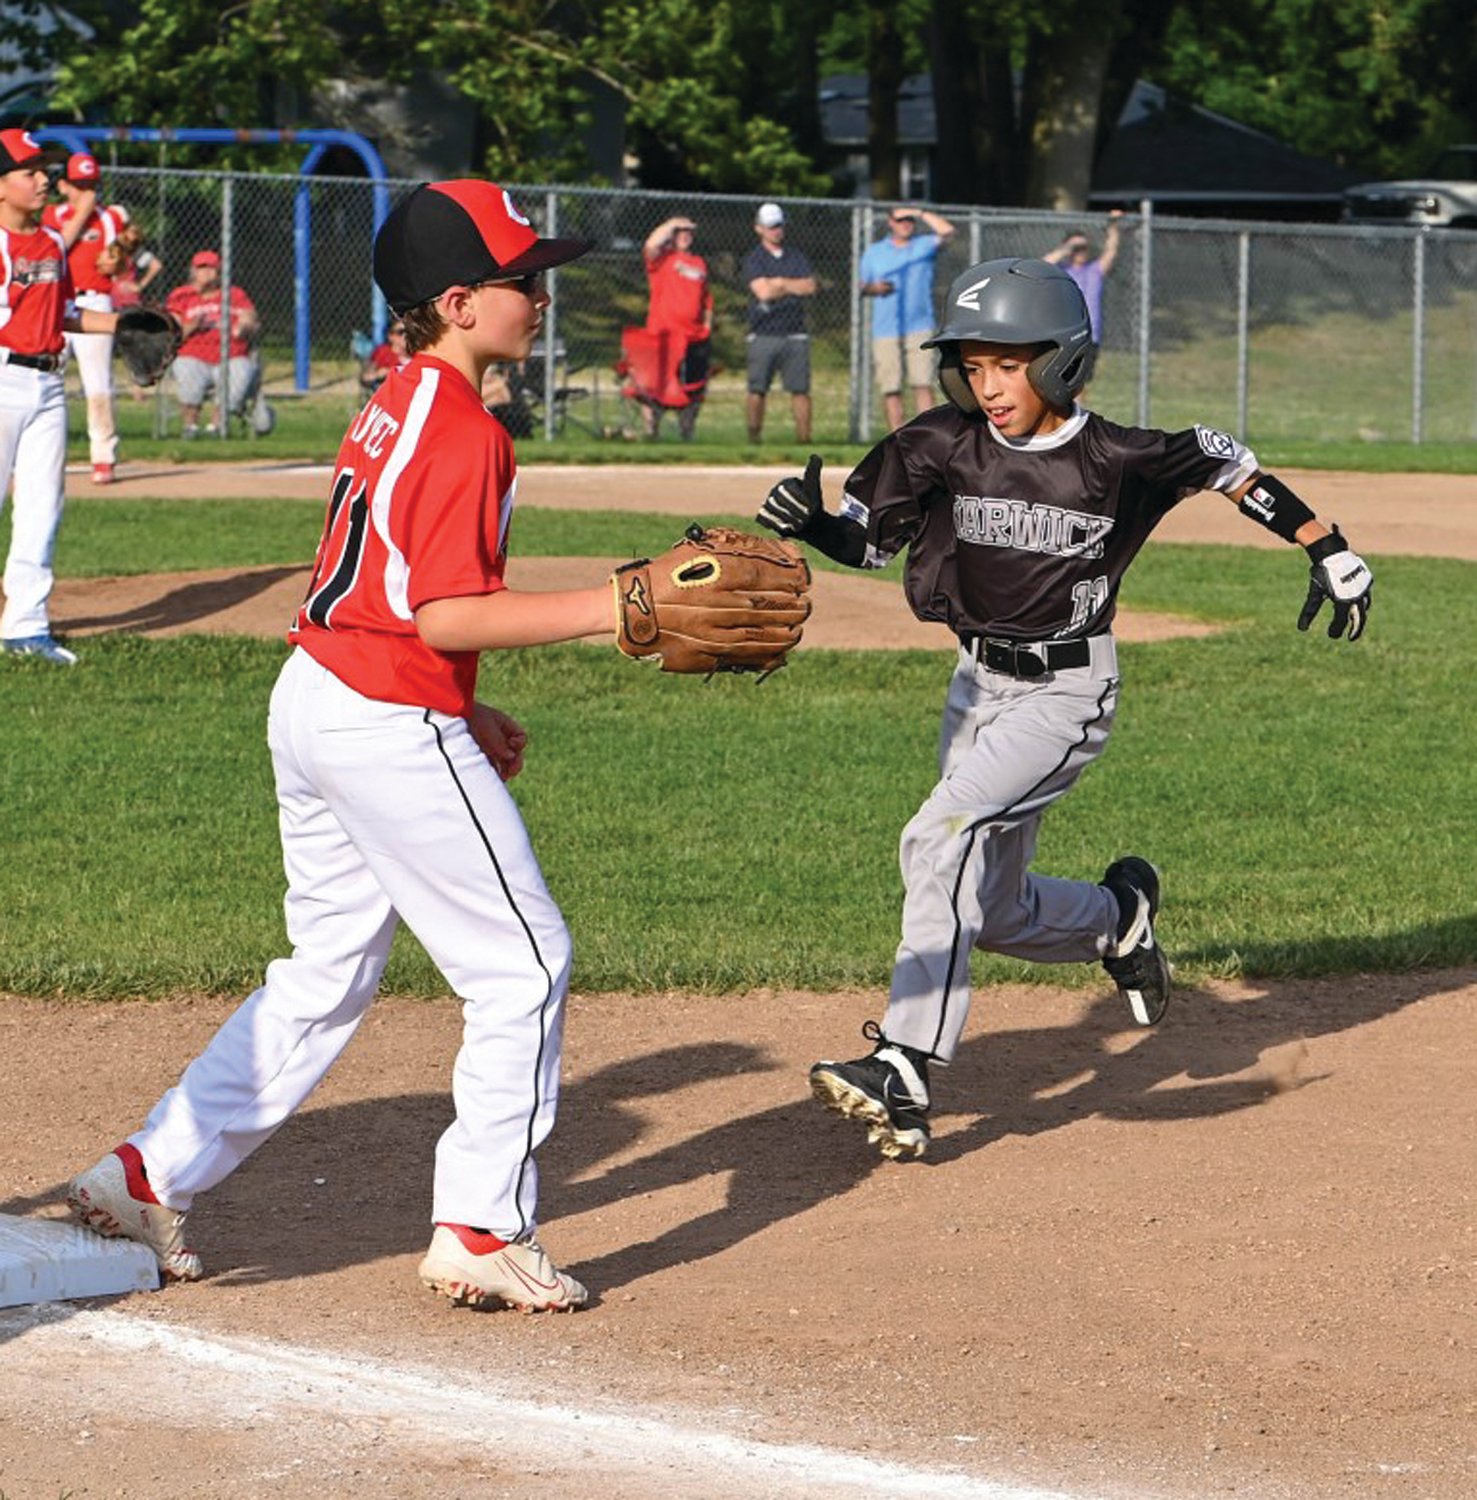 BACK TO THE BAG: North’s Steven Jerez runs back to first base while on the basepaths last week.